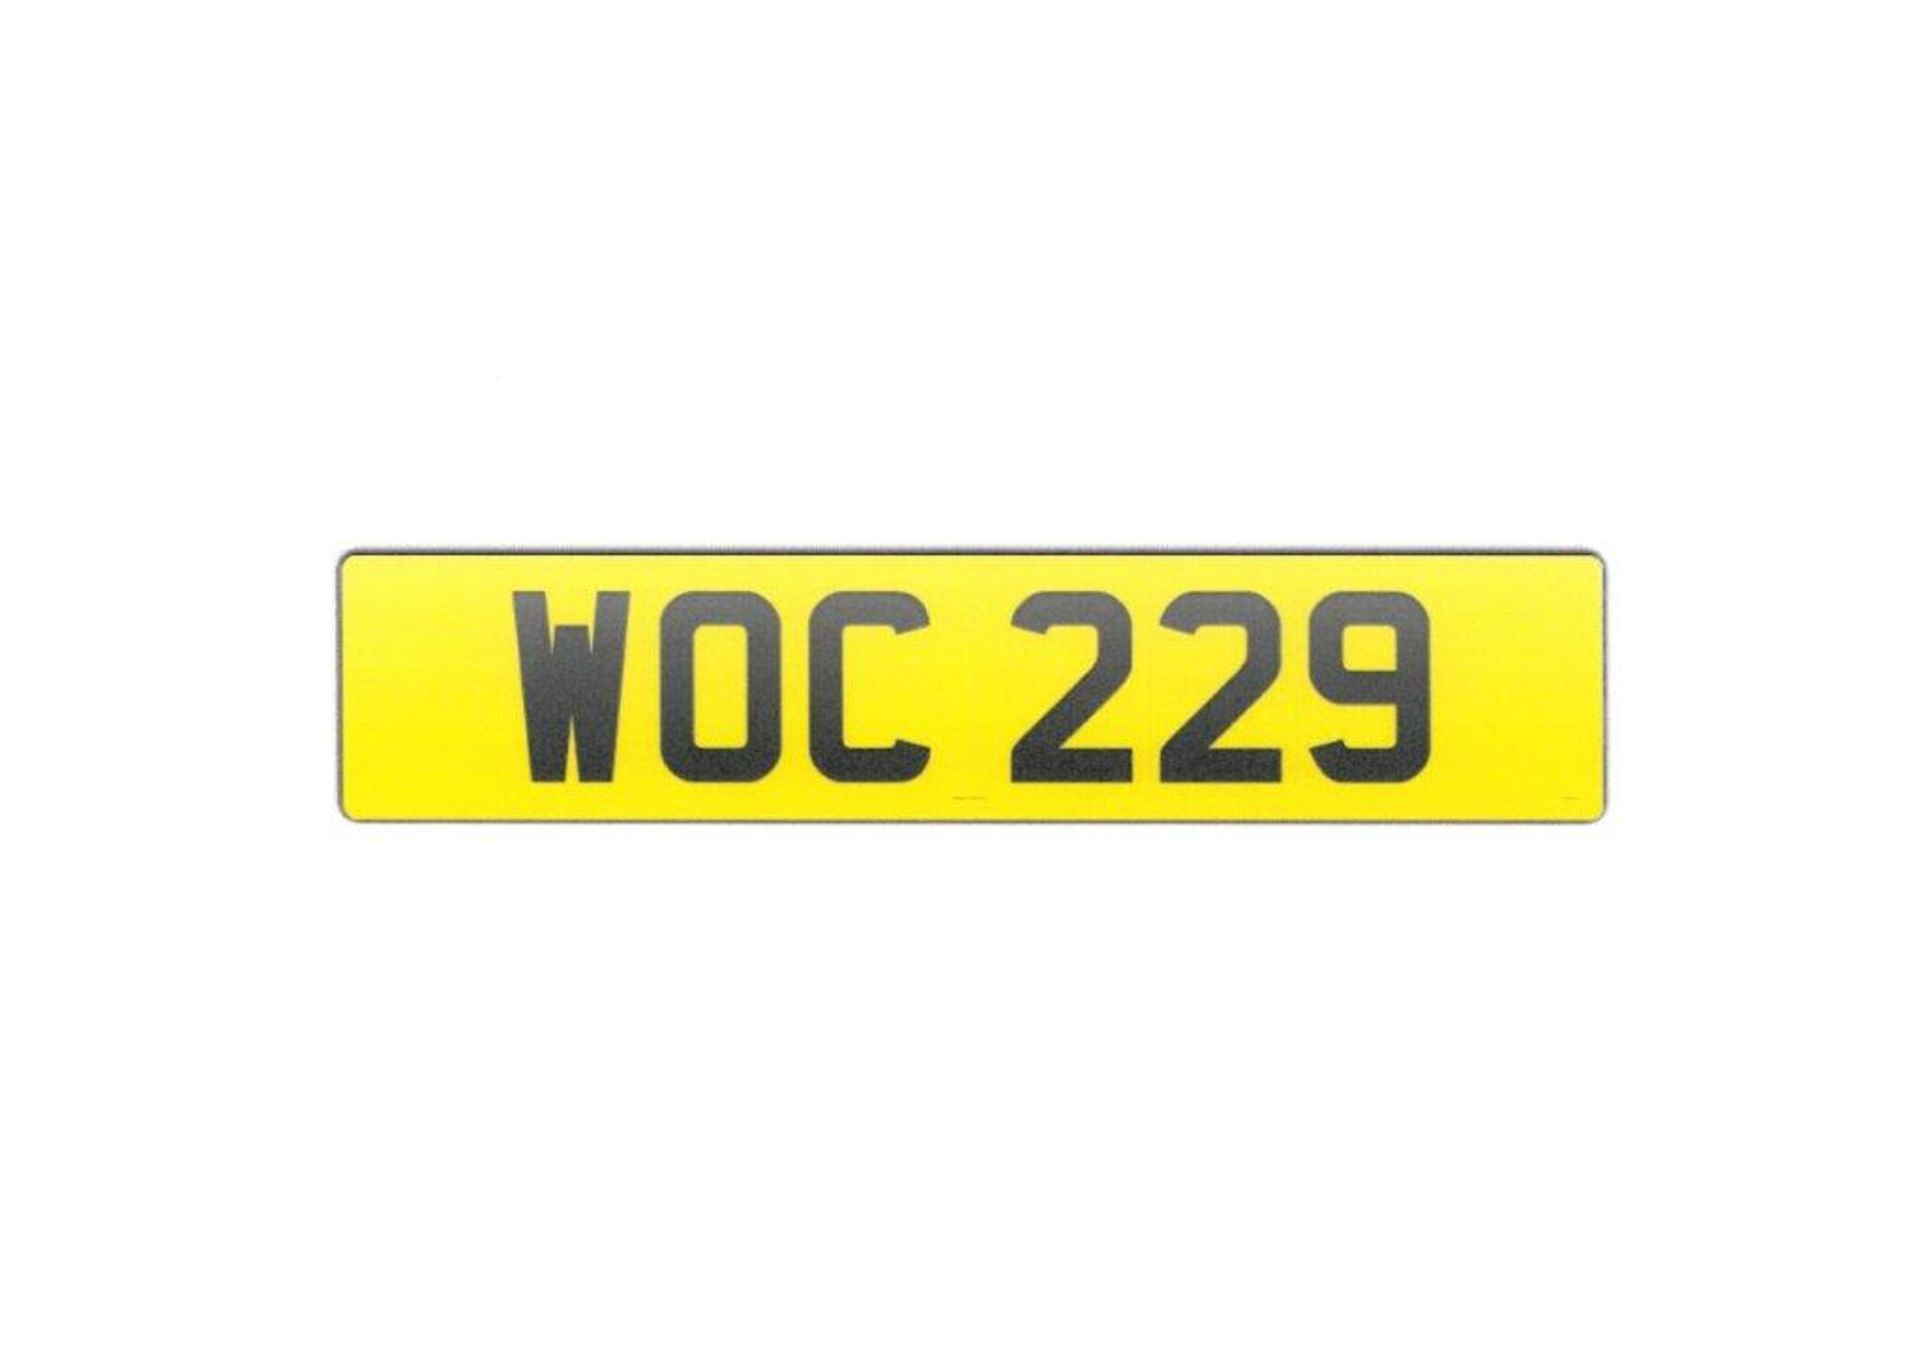 WOC 229 Registration Number on Retention Certificate